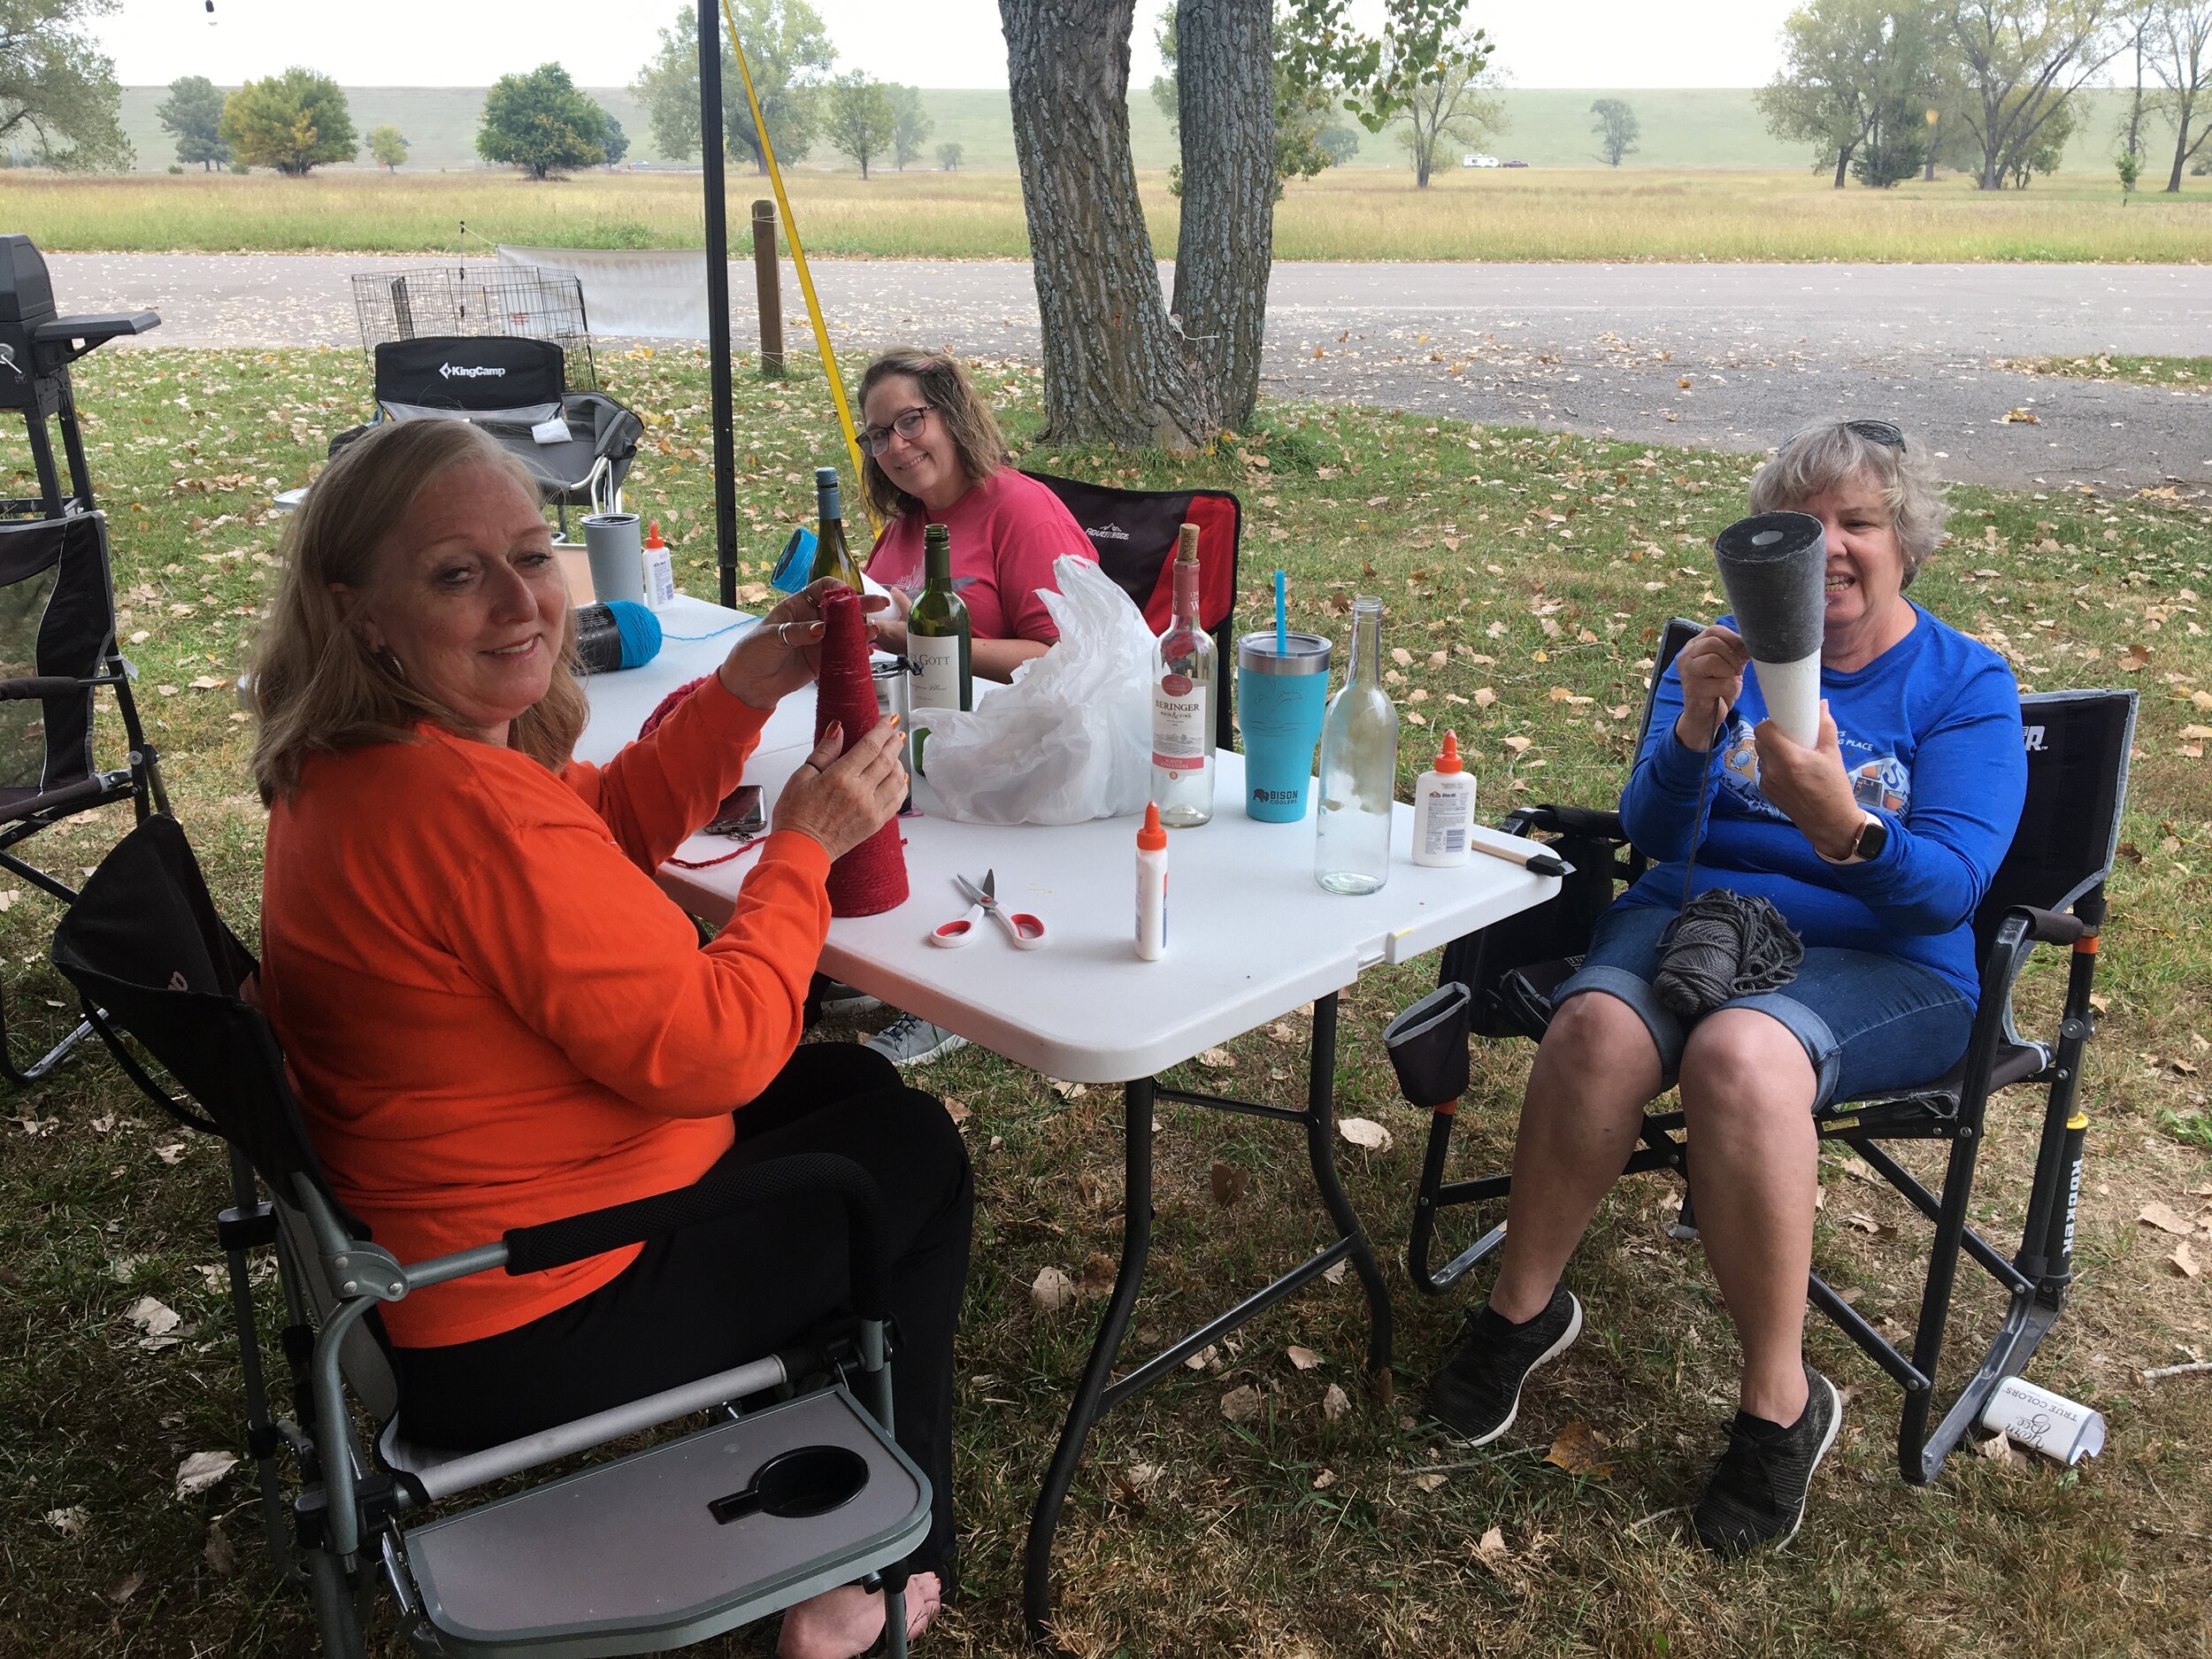  Wheeler Dealers Camping Club members created gnomes during their craft time at the monthly campout. Pictured from left are Ellen Cobb, Ponca City; Pam Doyle, Sand Springs and Linda Long, Ponca City. 